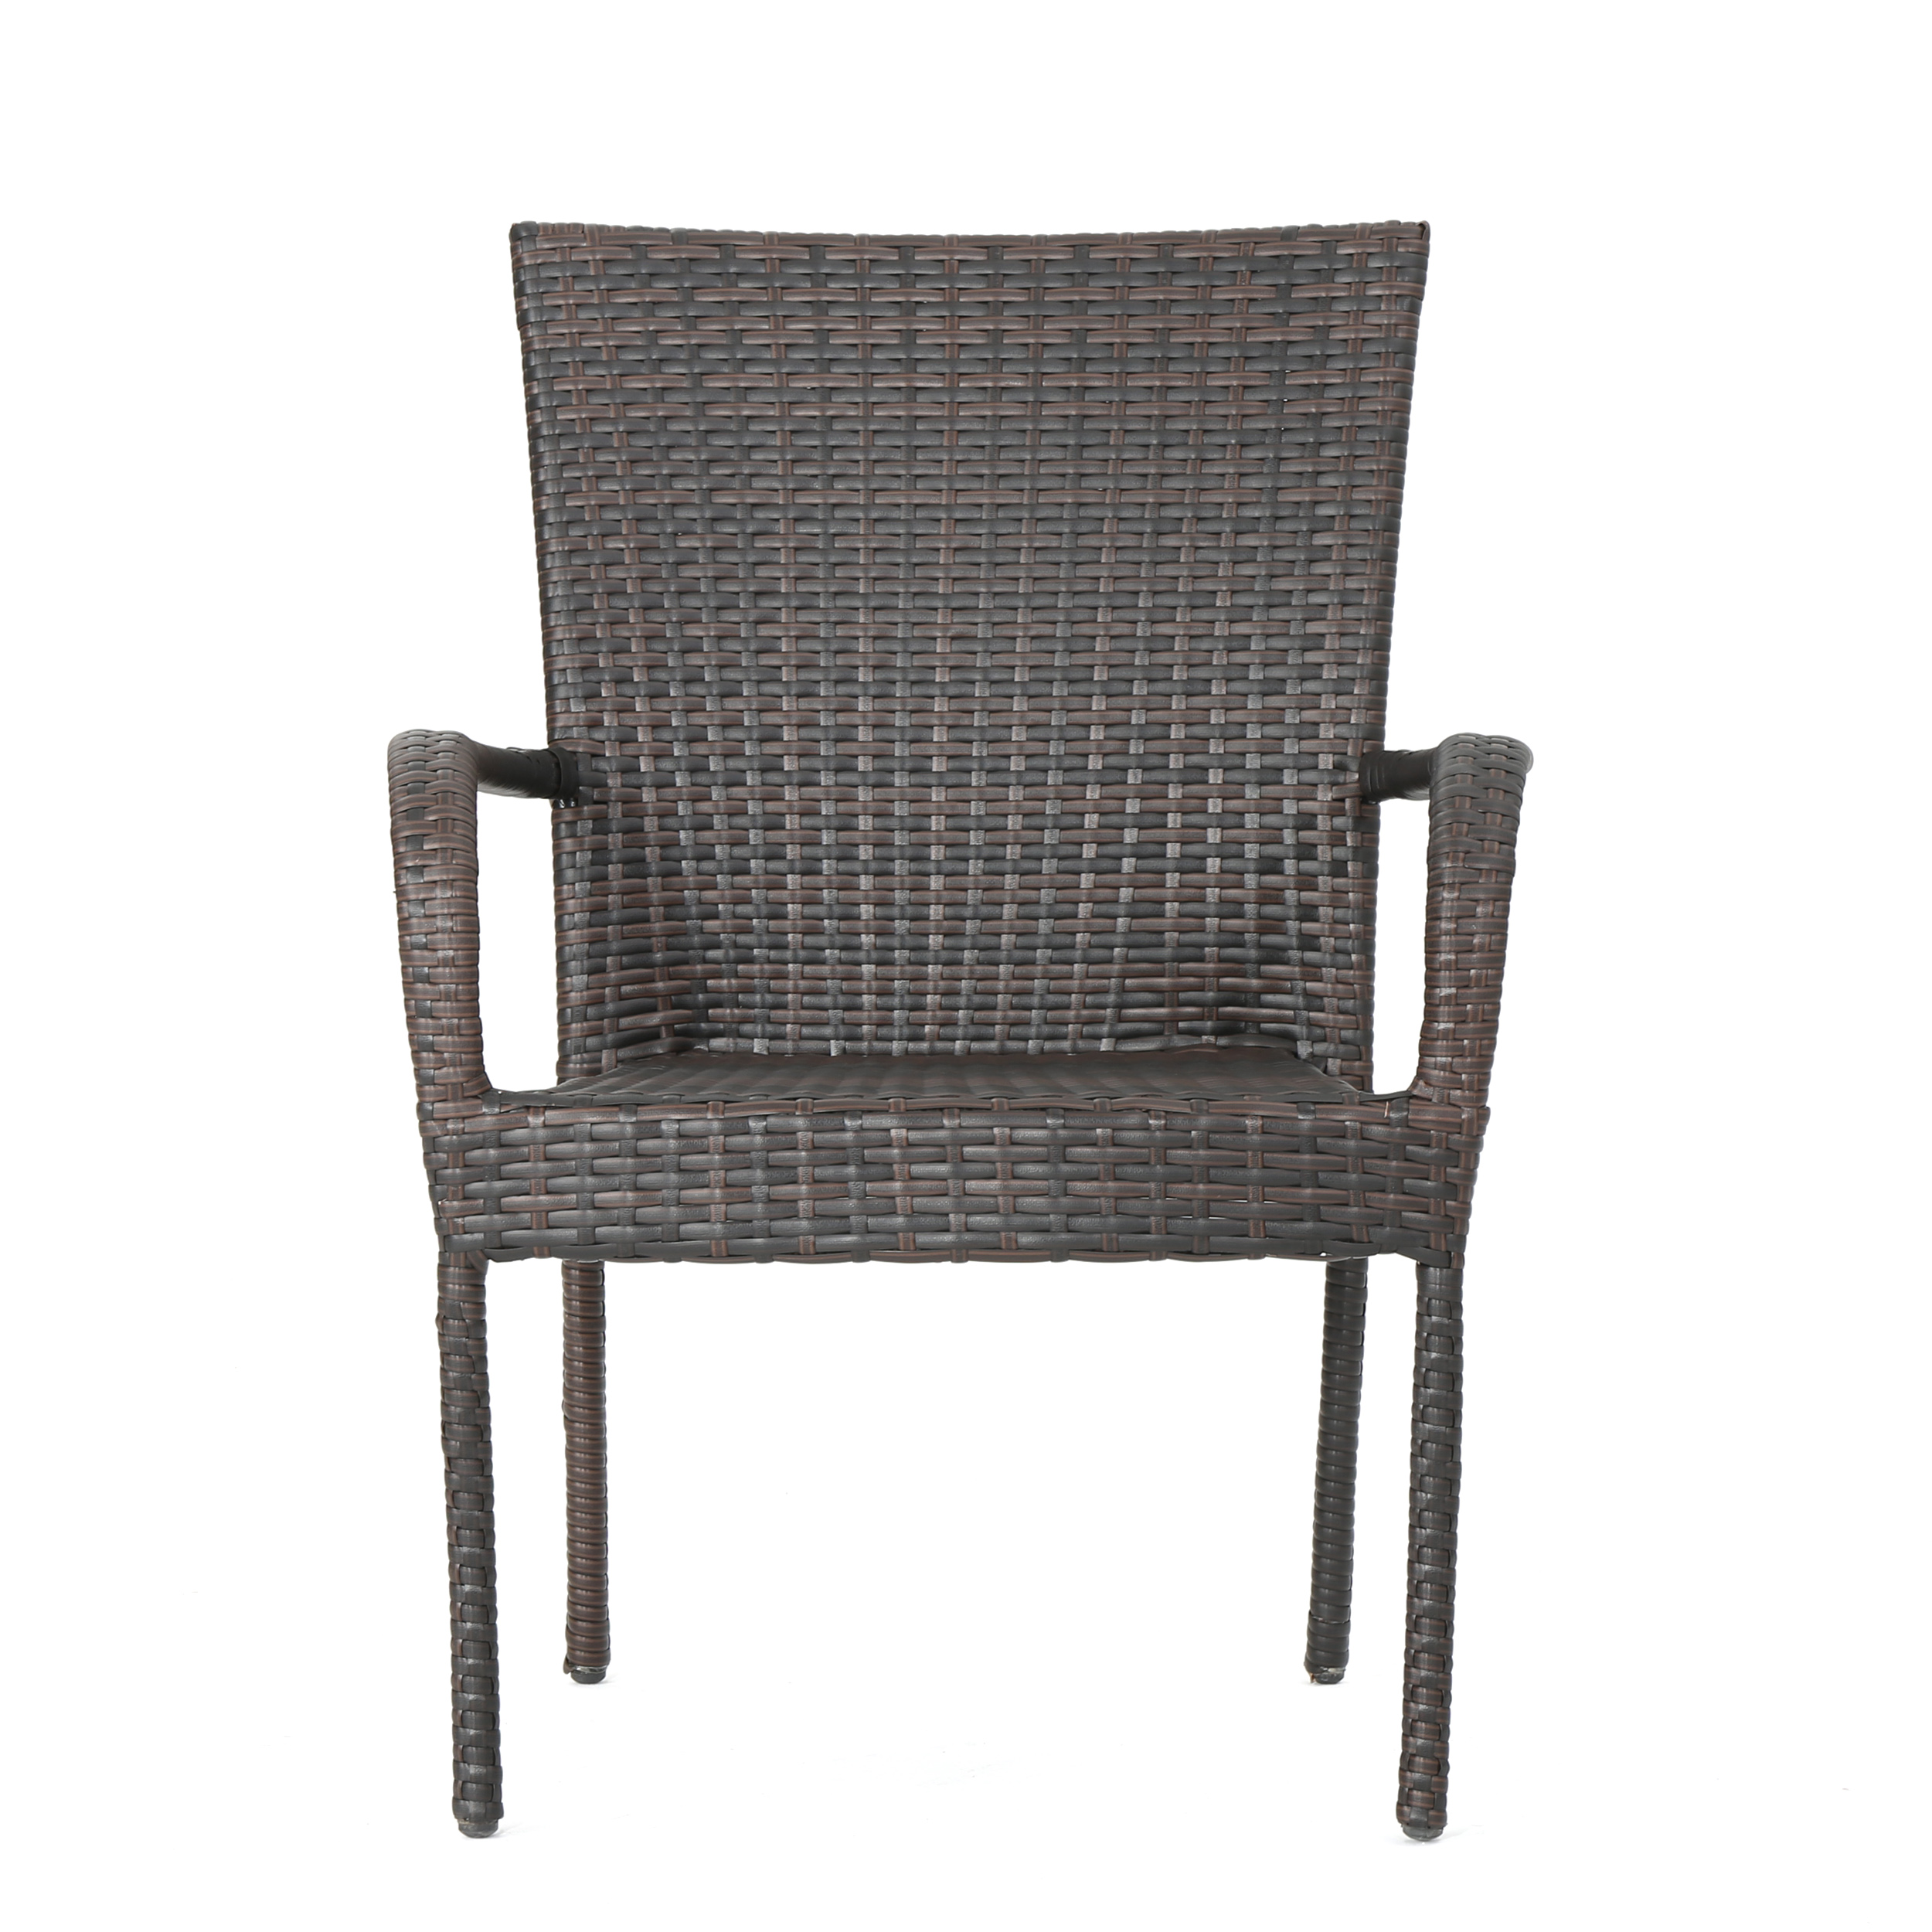 Cascada Outdoor 3 Piece Wicker Chat Set with Straight Back Chair, Multibrown - image 3 of 8